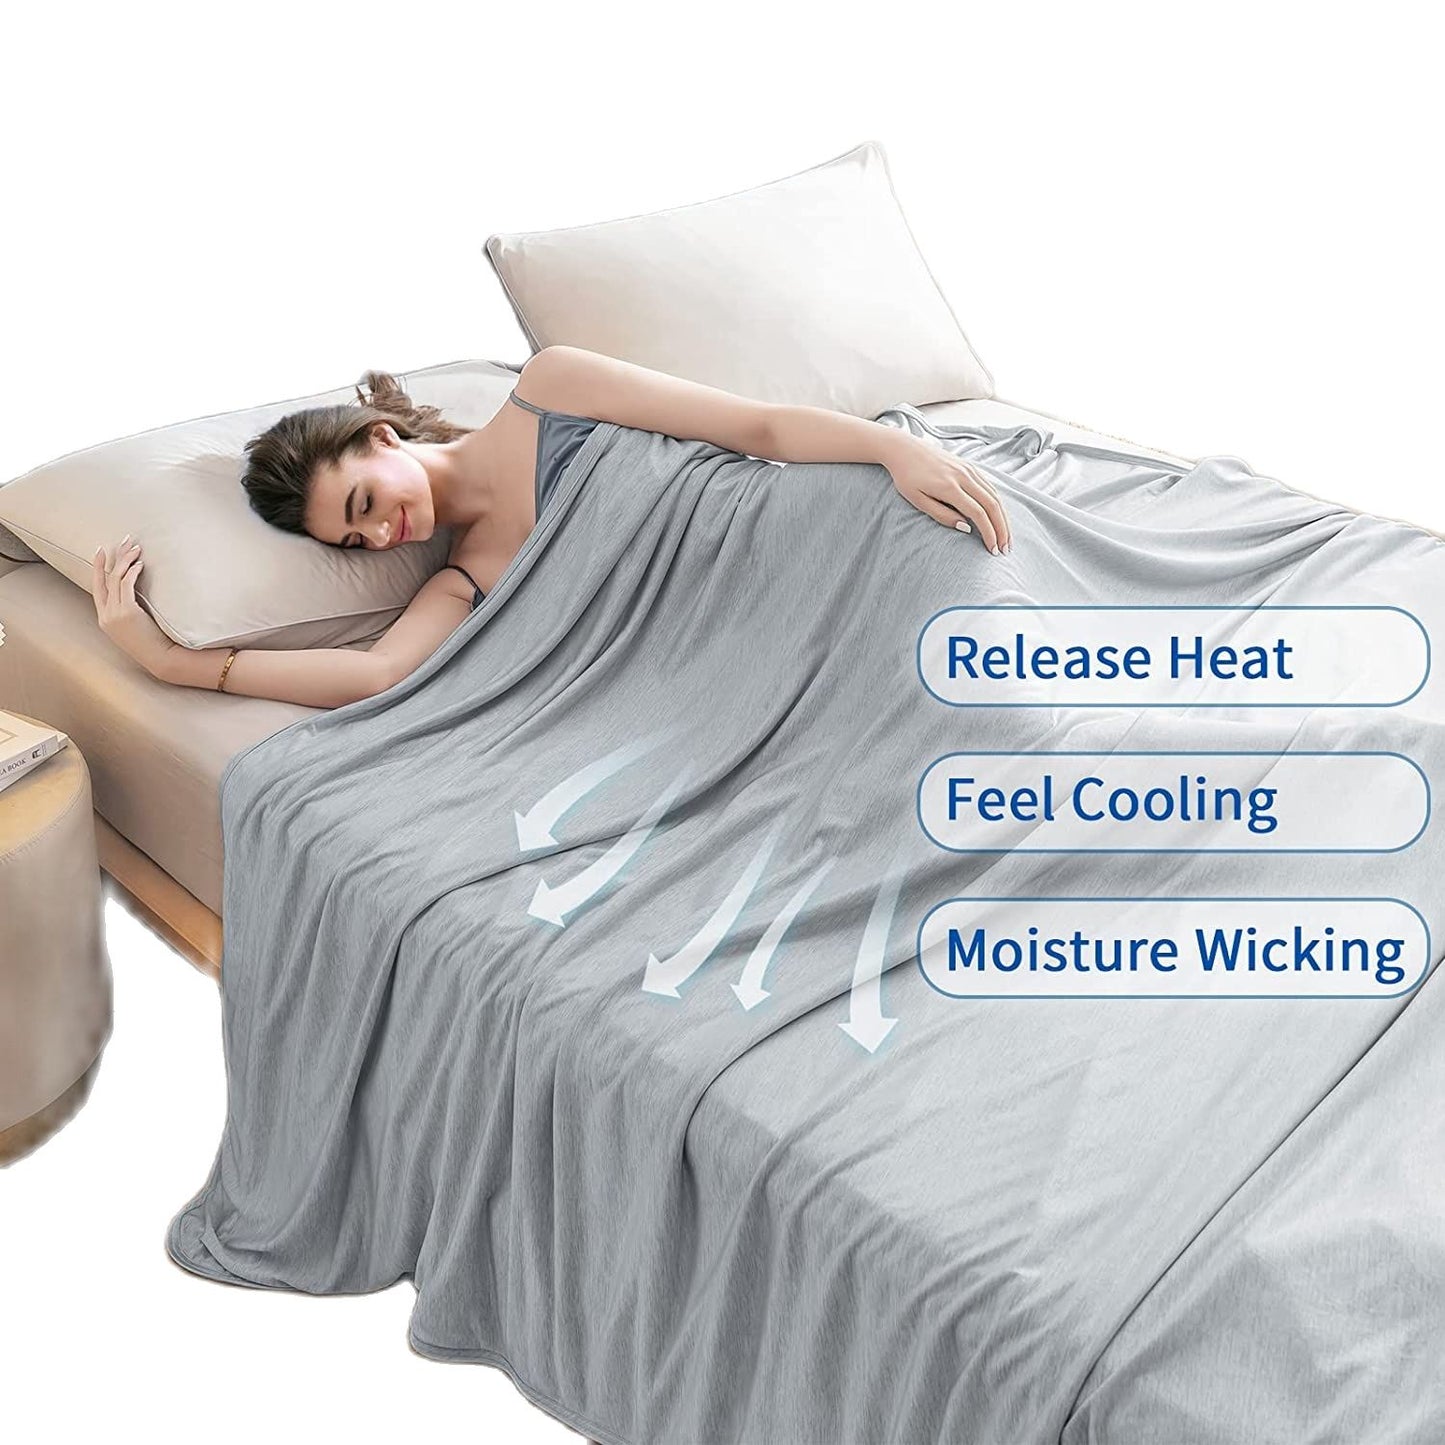 Happy Sleep During Hot Days With Cooling Blanket